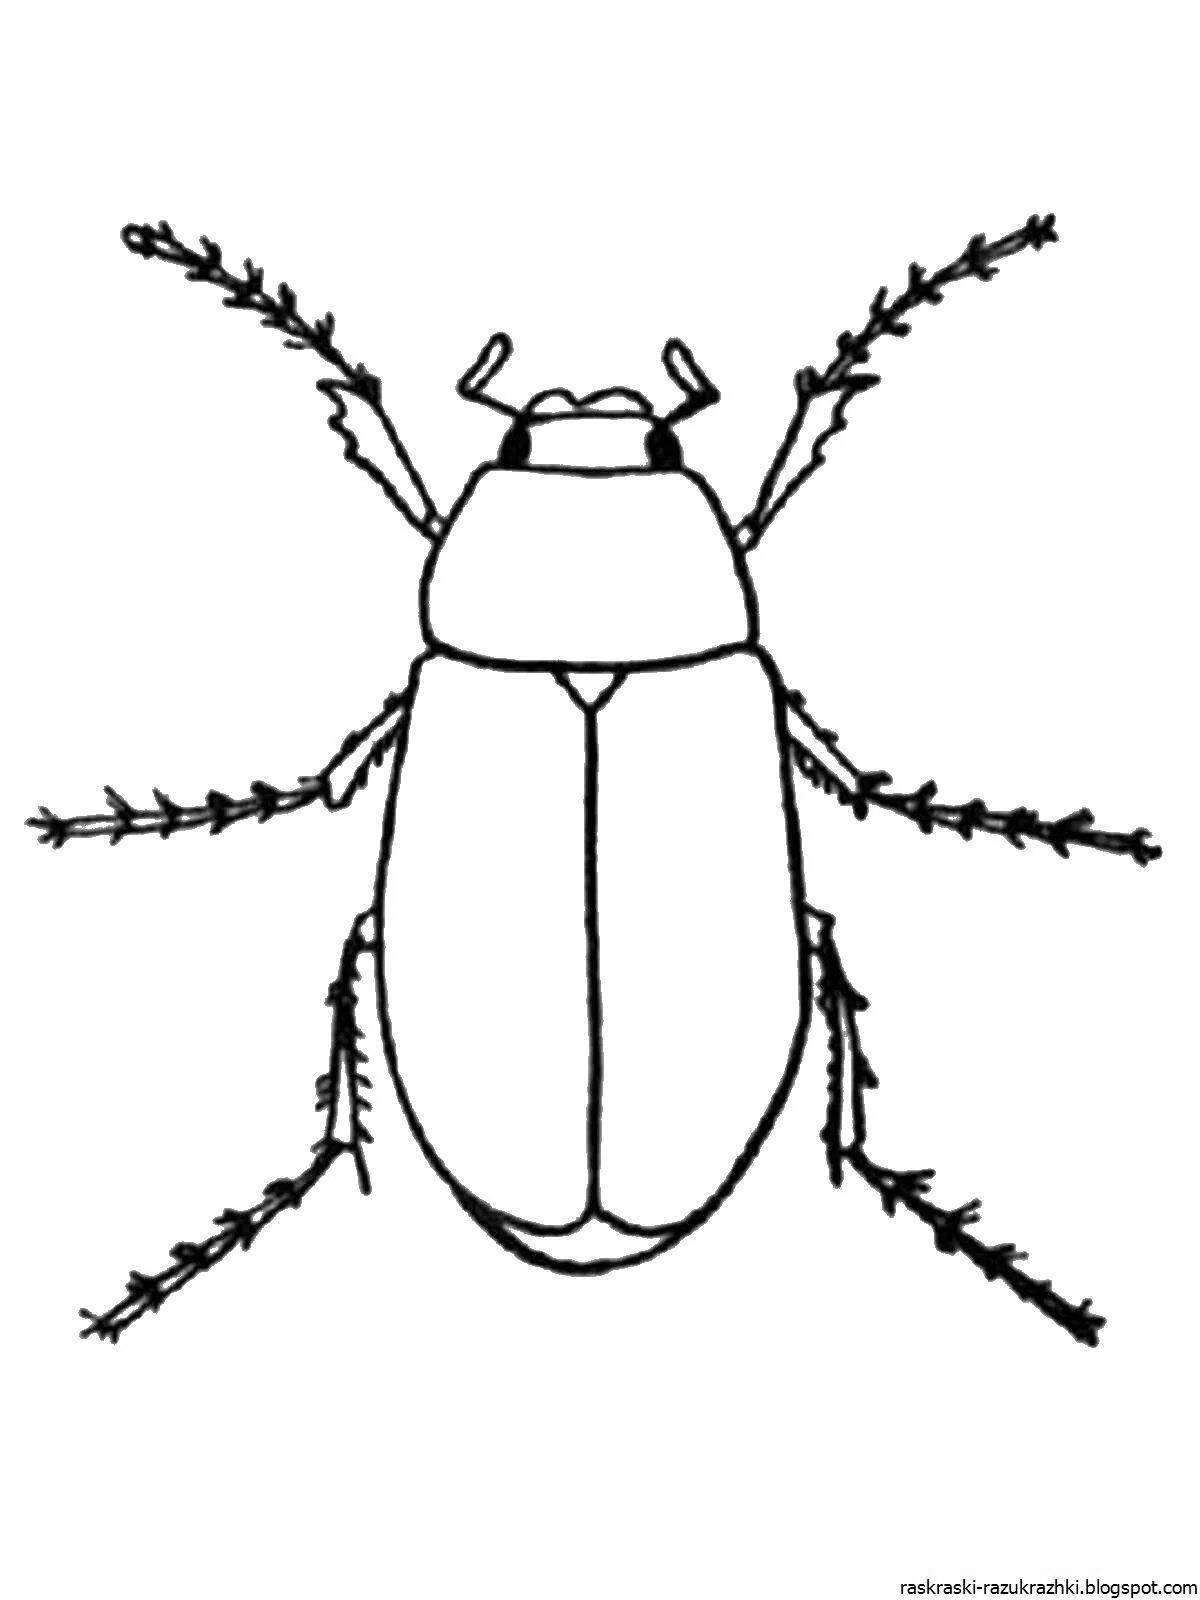 Fun beetle coloring pages for 3-4 year olds